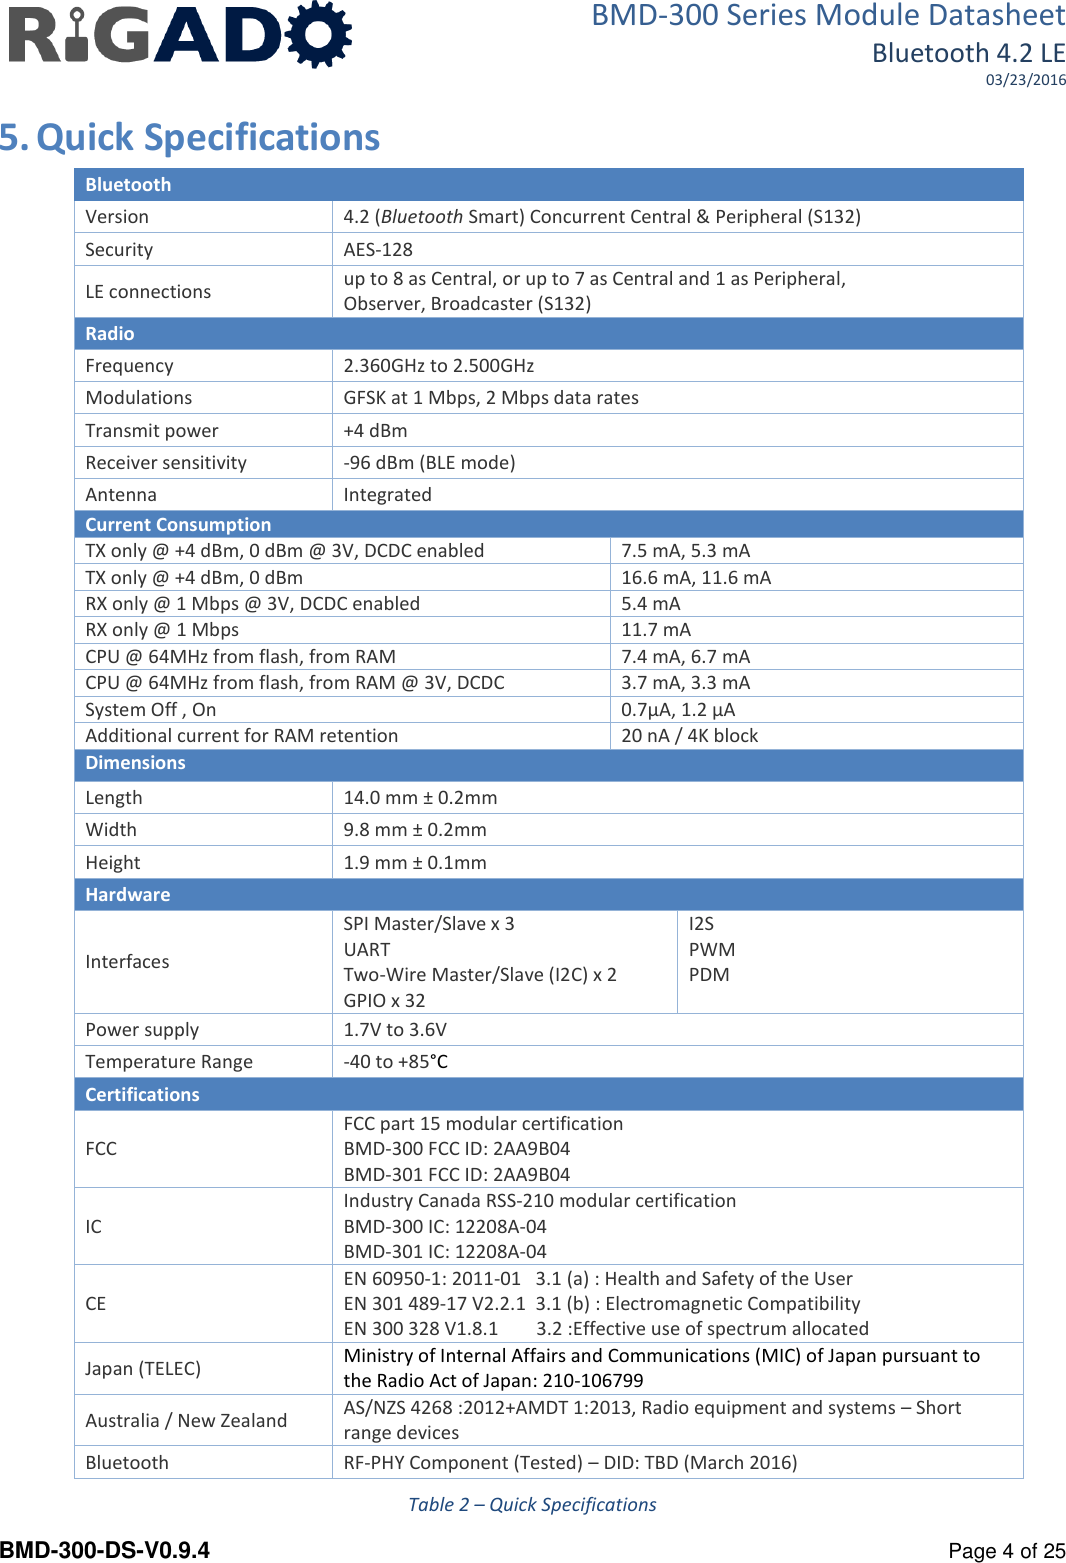 BMD-300 Series Module Datasheet Bluetooth 4.2 LE 03/23/2016  BMD-300-DS-V0.9.4      Page 4 of 25 5. Quick Specifications  Bluetooth Version 4.2 (Bluetooth Smart) Concurrent Central &amp; Peripheral (S132) Security AES-128 LE connections up to 8 as Central, or up to 7 as Central and 1 as Peripheral,  Observer, Broadcaster (S132) Radio Frequency 2.360GHz to 2.500GHz Modulations GFSK at 1 Mbps, 2 Mbps data rates Transmit power +4 dBm Receiver sensitivity -96 dBm (BLE mode) Antenna  Integrated Current Consumption TX only @ +4 dBm, 0 dBm @ 3V, DCDC enabled 7.5 mA, 5.3 mA TX only @ +4 dBm, 0 dBm 16.6 mA, 11.6 mA RX only @ 1 Mbps @ 3V, DCDC enabled 5.4 mA RX only @ 1 Mbps 11.7 mA CPU @ 64MHz from flash, from RAM 7.4 mA, 6.7 mA CPU @ 64MHz from flash, from RAM @ 3V, DCDC 3.7 mA, 3.3 mA System Off , On  0.7µA, 1.2 µA Additional current for RAM retention 20 nA / 4K block Dimensions Length 14.0 mm ± 0.2mm Width 9.8 mm ± 0.2mm Height 1.9 mm ± 0.1mm Hardware Interfaces SPI Master/Slave x 3 UART Two-Wire Master/Slave (I2C) x 2 GPIO x 32 I2S PWM PDM  Power supply 1.7V to 3.6V Temperature Range -40 to +85°C Certifications FCC FCC part 15 modular certification BMD-300 FCC ID: 2AA9B04 BMD-301 FCC ID: 2AA9B04 IC Industry Canada RSS-210 modular certification BMD-300 IC: 12208A-04  BMD-301 IC: 12208A-04 CE EN 60950-1: 2011-01   3.1 (a) : Health and Safety of the User  EN 301 489-17 V2.2.1  3.1 (b) : Electromagnetic Compatibility  EN 300 328 V1.8.1        3.2 :Effective use of spectrum allocated Japan (TELEC) Ministry of Internal Affairs and Communications (MIC) of Japan pursuant to the Radio Act of Japan: 210-106799 Australia / New Zealand AS/NZS 4268 :2012+AMDT 1:2013, Radio equipment and systems – Short range devices Bluetooth RF-PHY Component (Tested) – DID: TBD (March 2016) Table 2 – Quick Specifications 